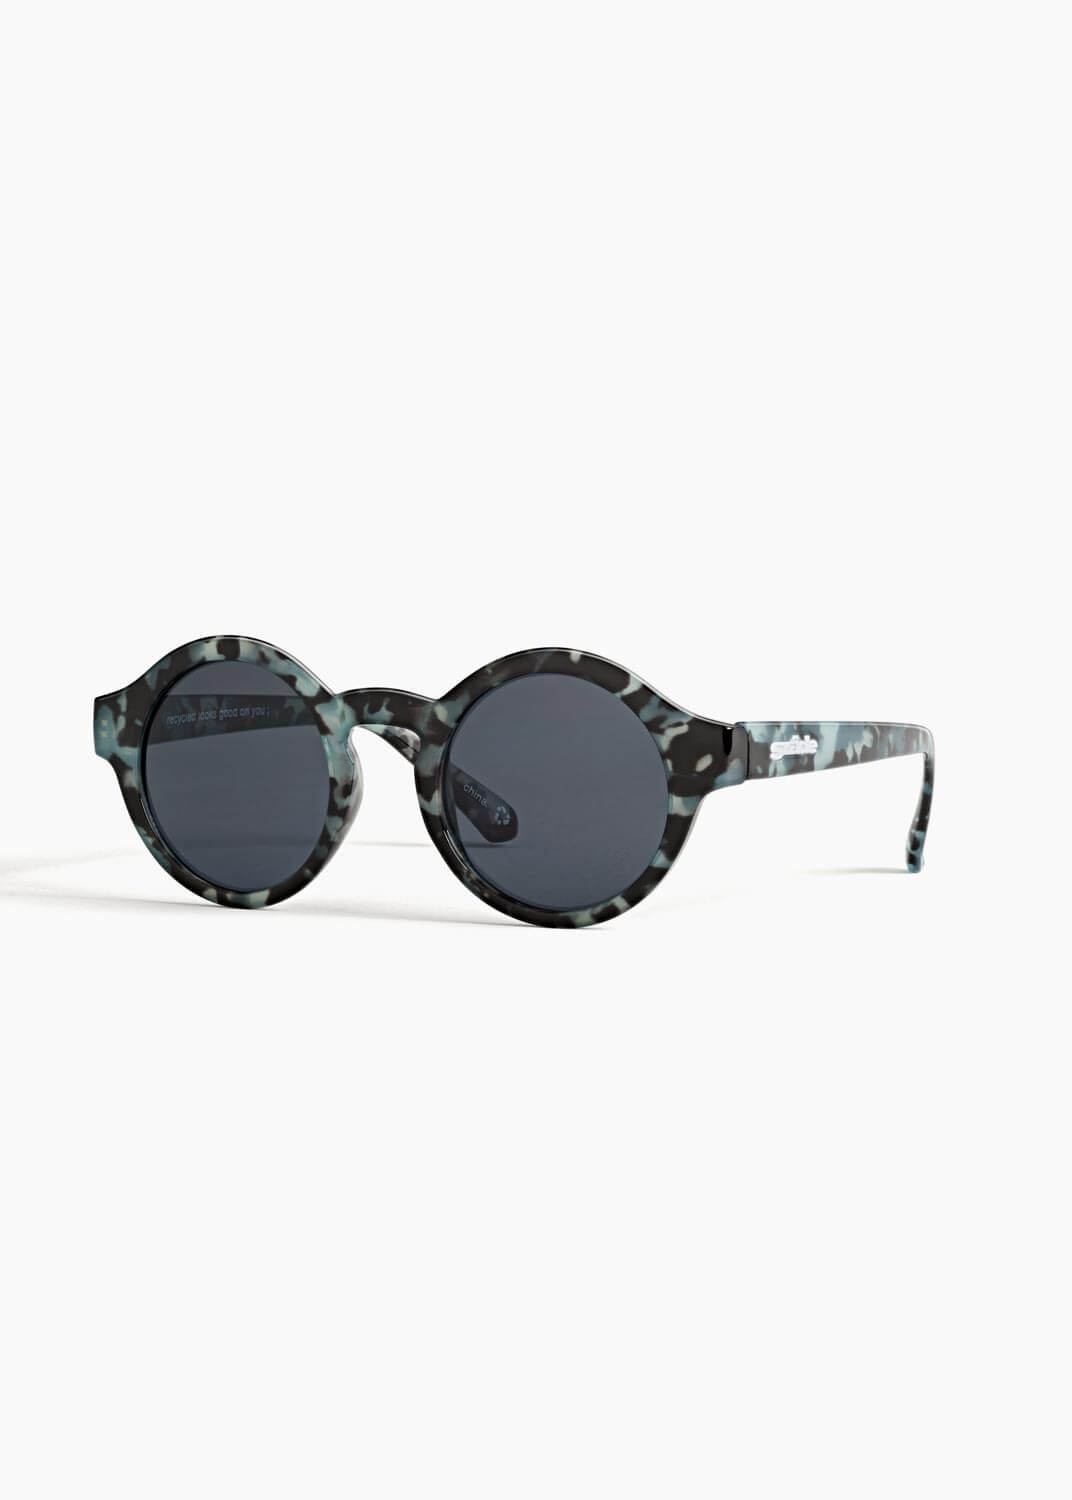 Szade RECYCLED SUNGLASSES  Szade - Lazenby in Stoned Saxe/Ink